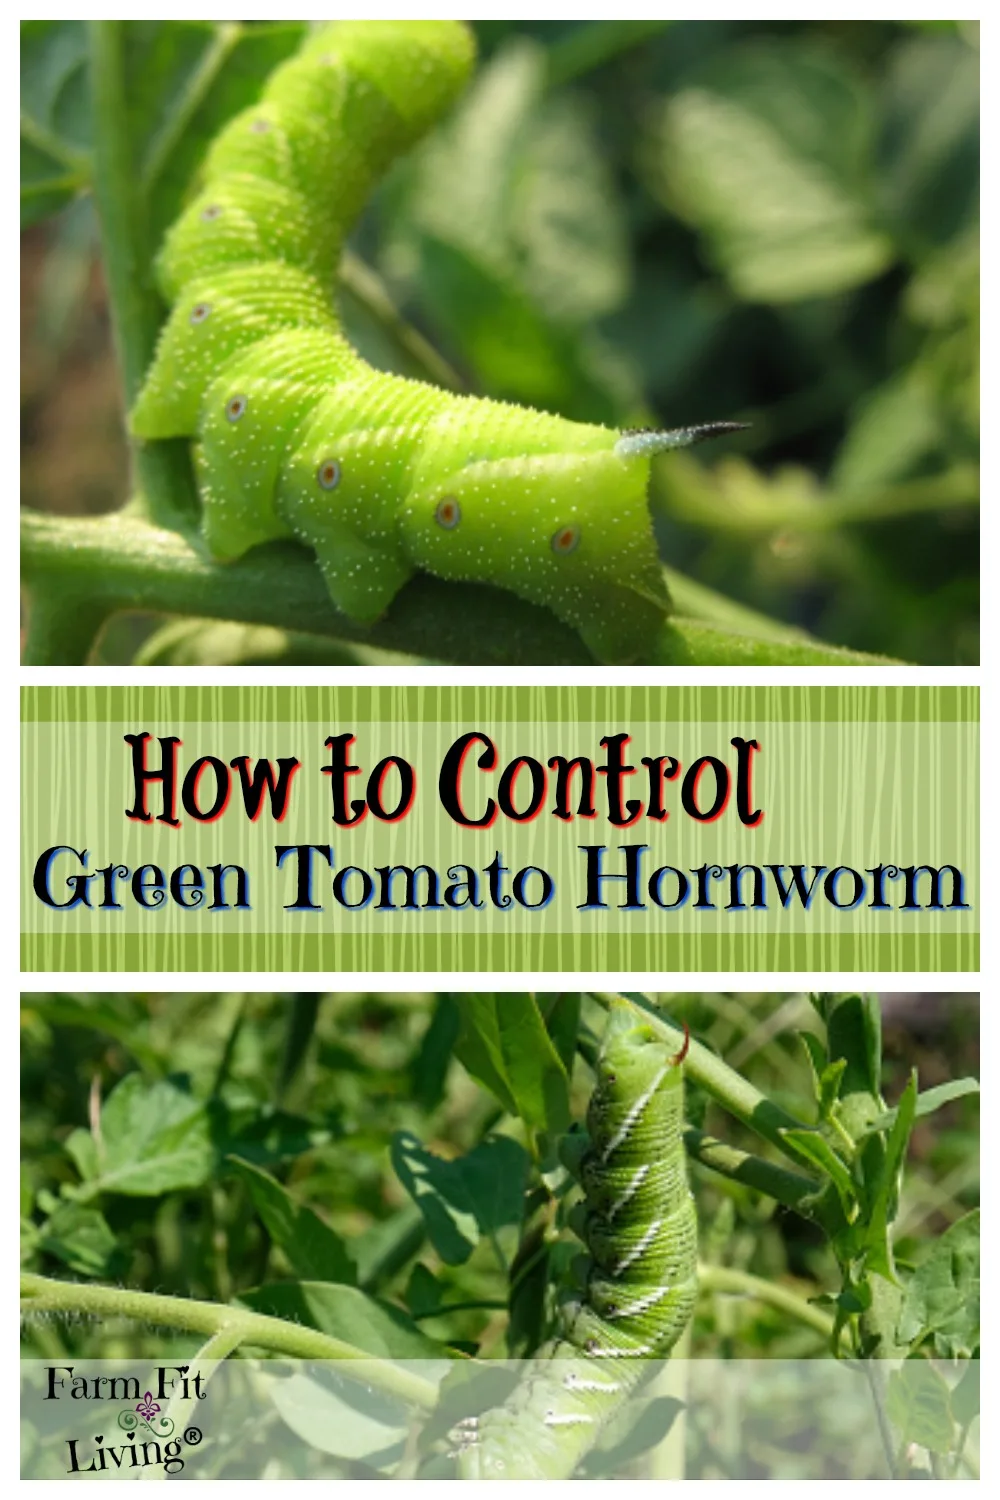 Control Green Tomato Horn Worms